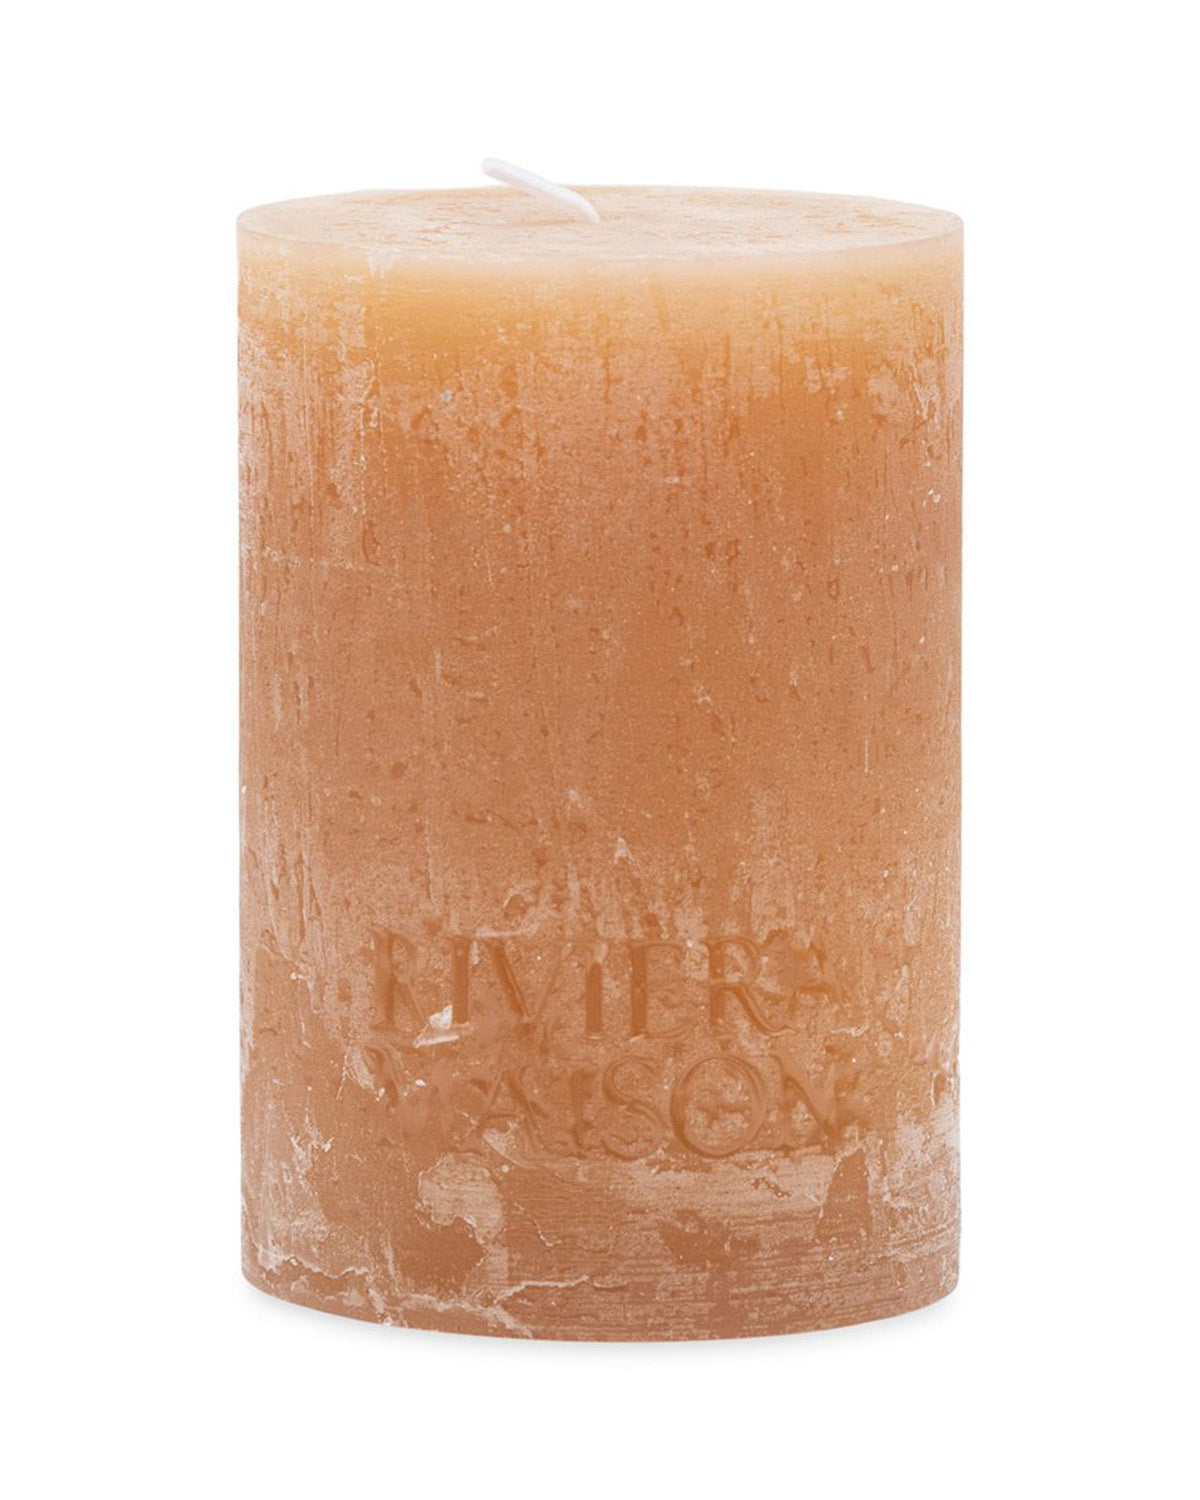 CANDLE in color RUSTIC CARAMEL by Riviera Maison 